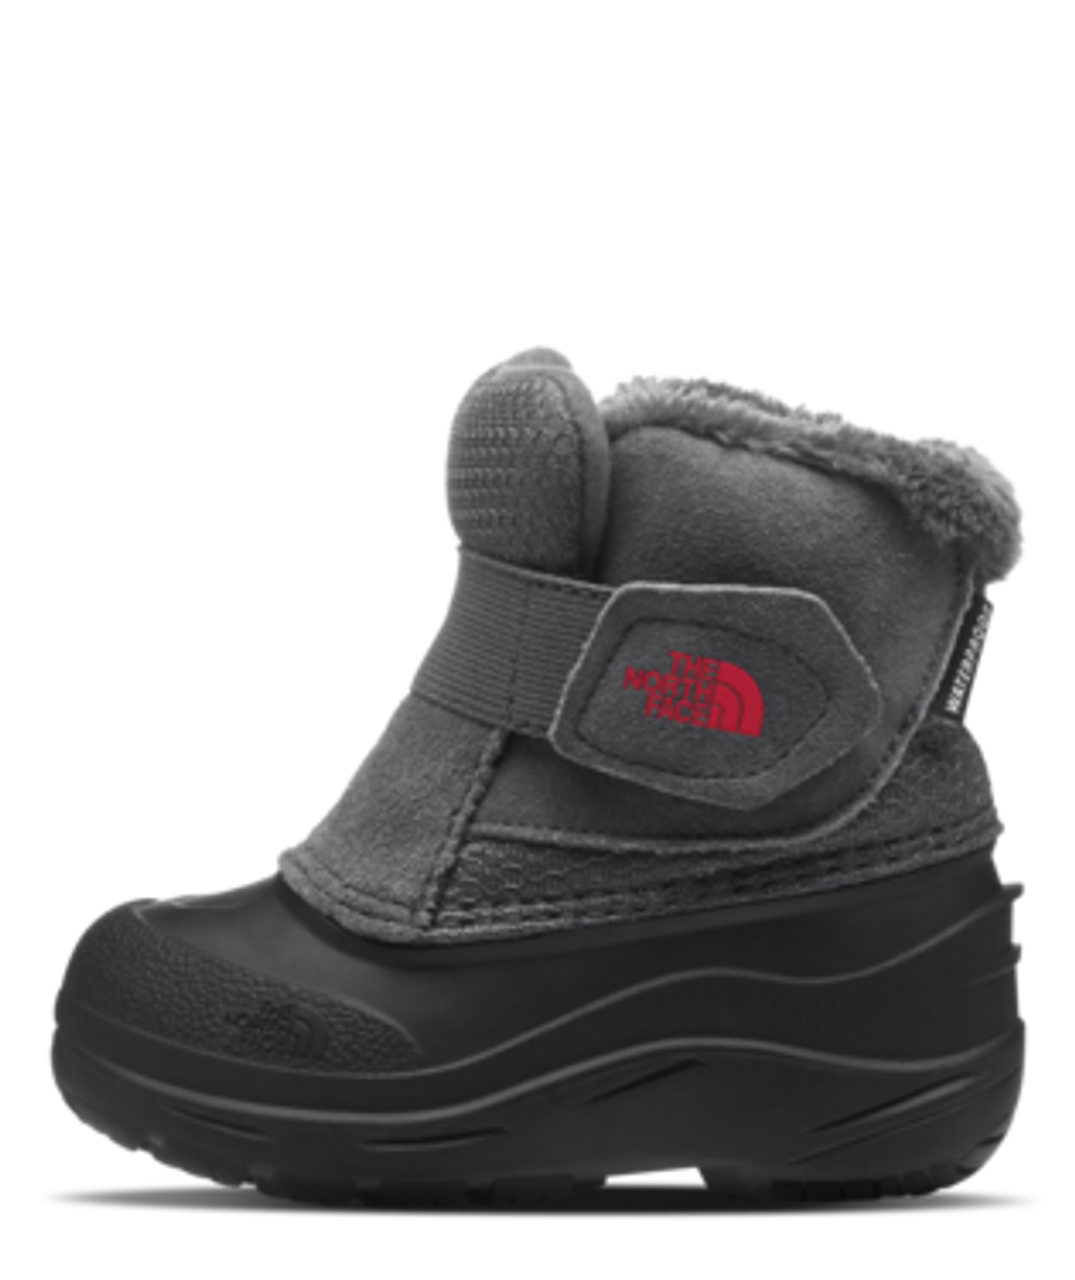 The North Face - Toddler Alpenglow II Boots - Zinc Grey